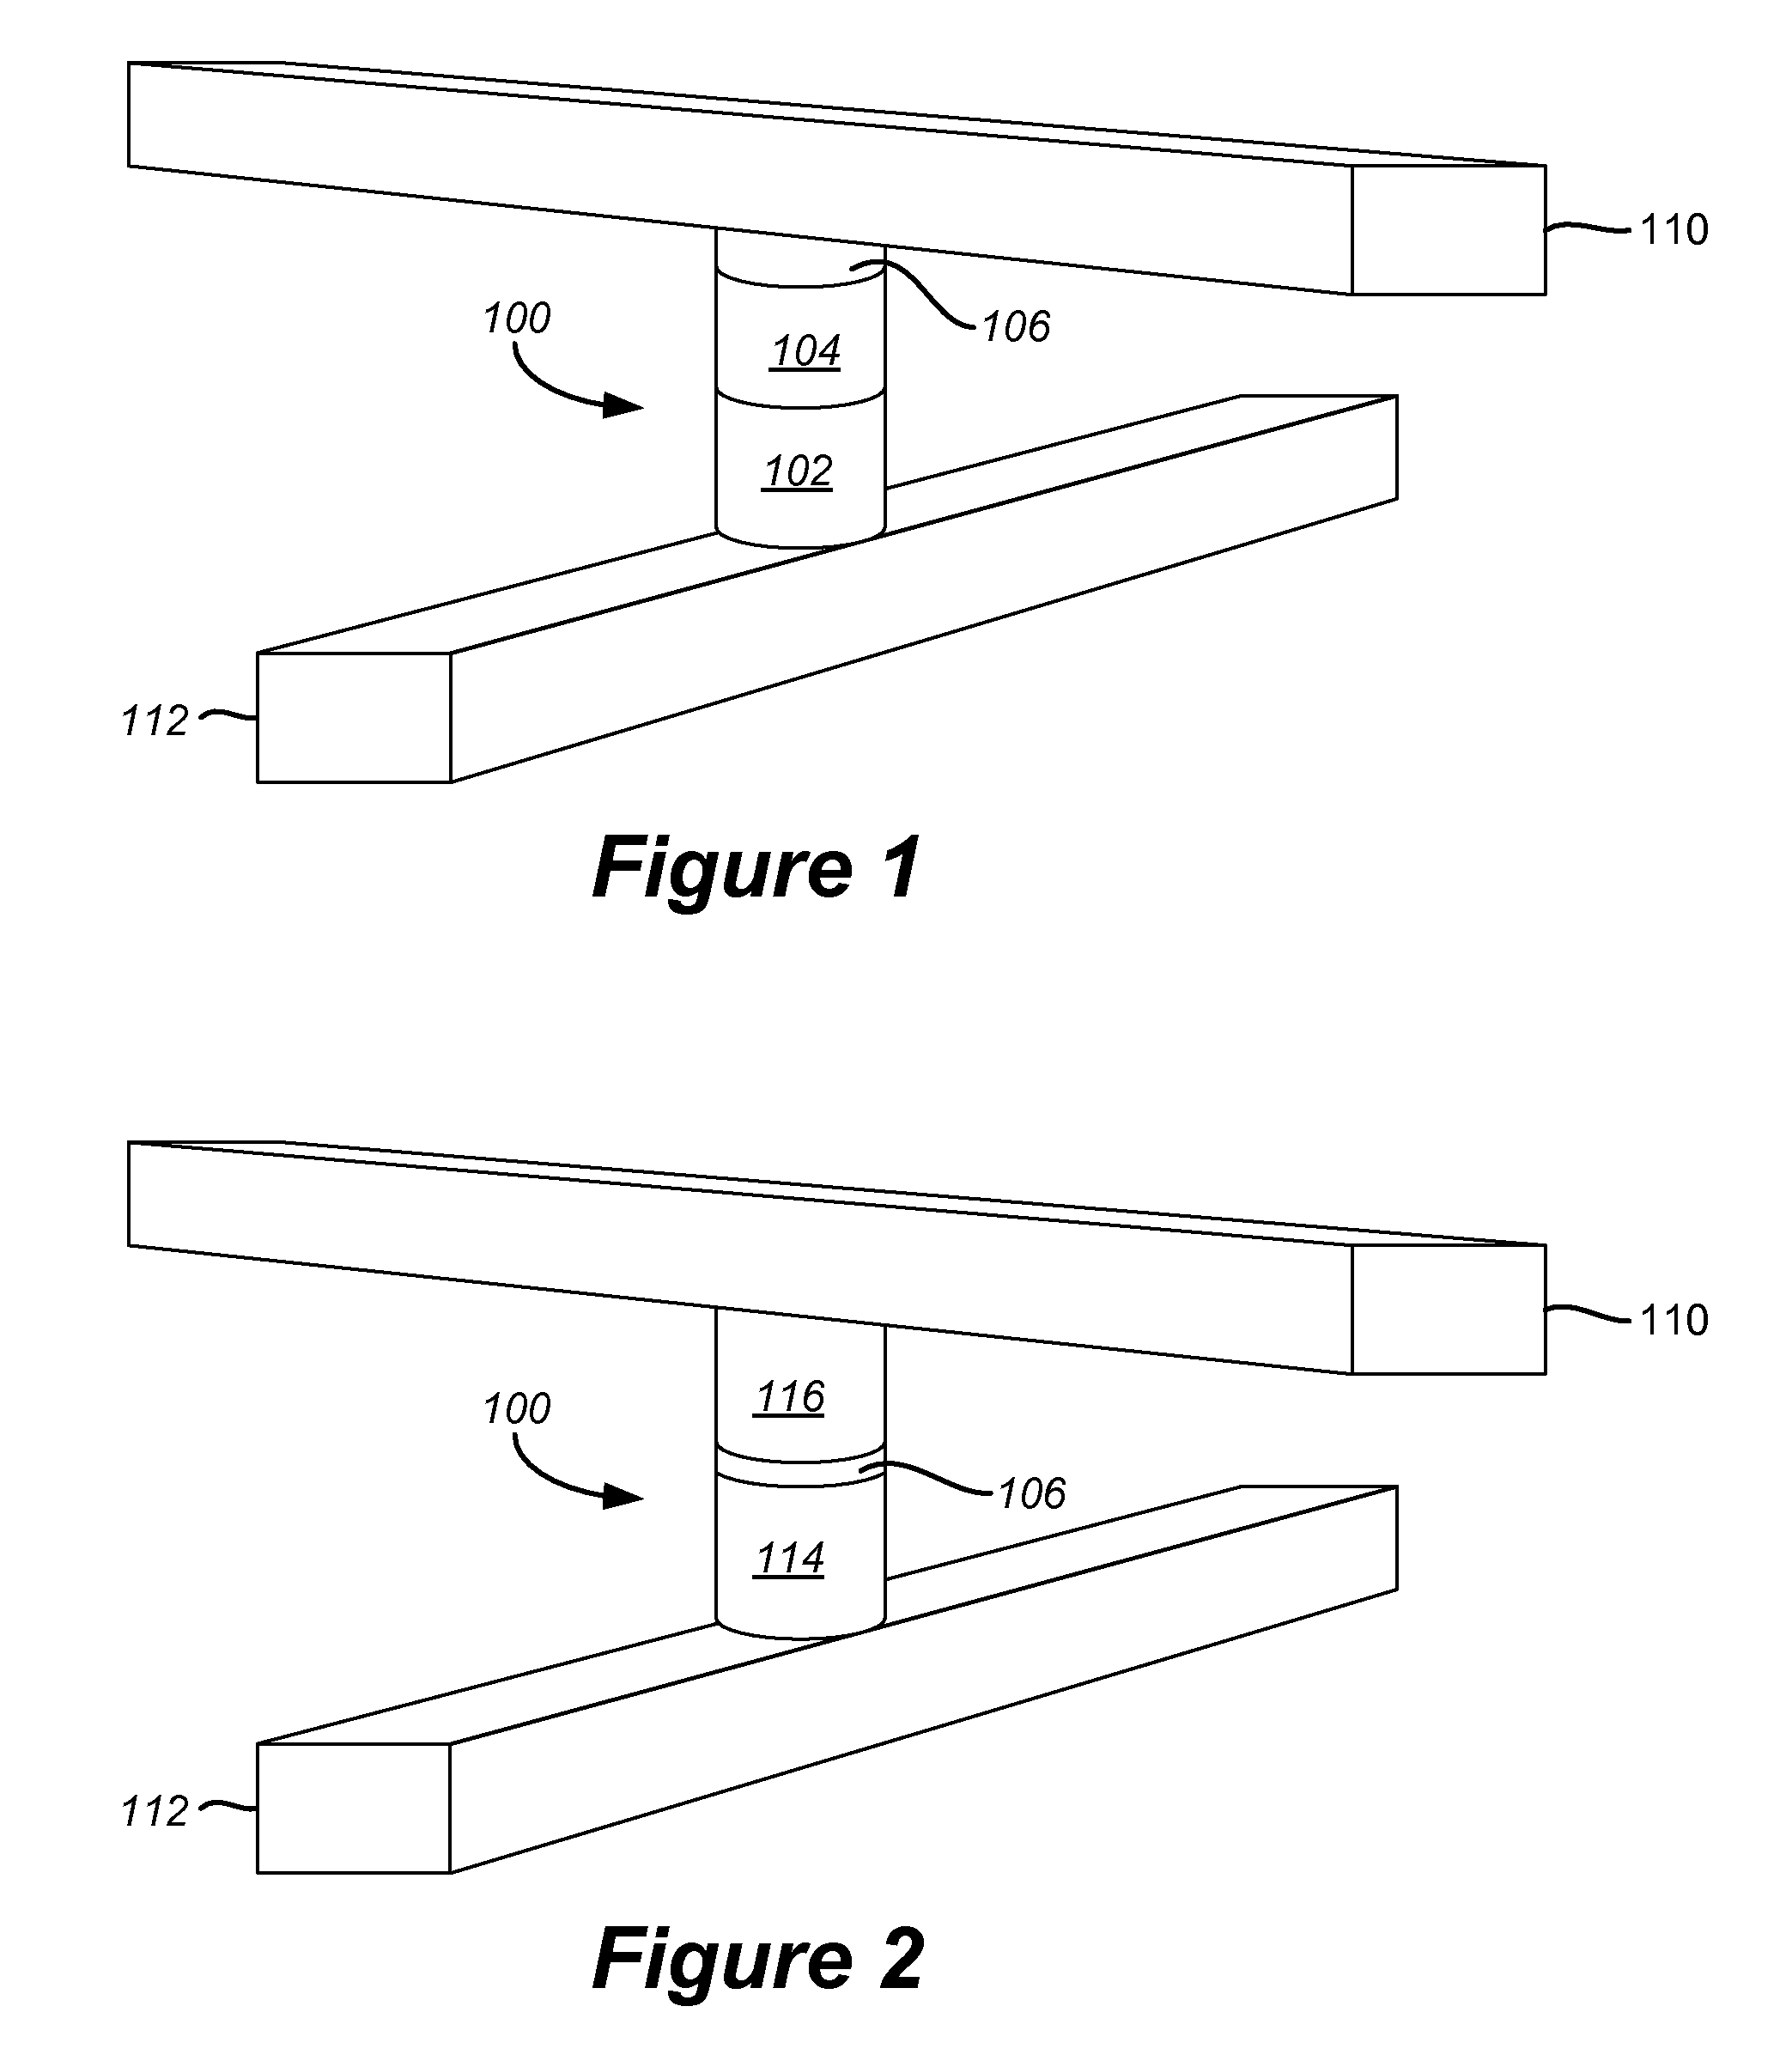 Non-Volatile Memory Arrays Comprising Rail Stacks with a Shared Diode Component Portion for Diodes of Electrically Isolated Pillars